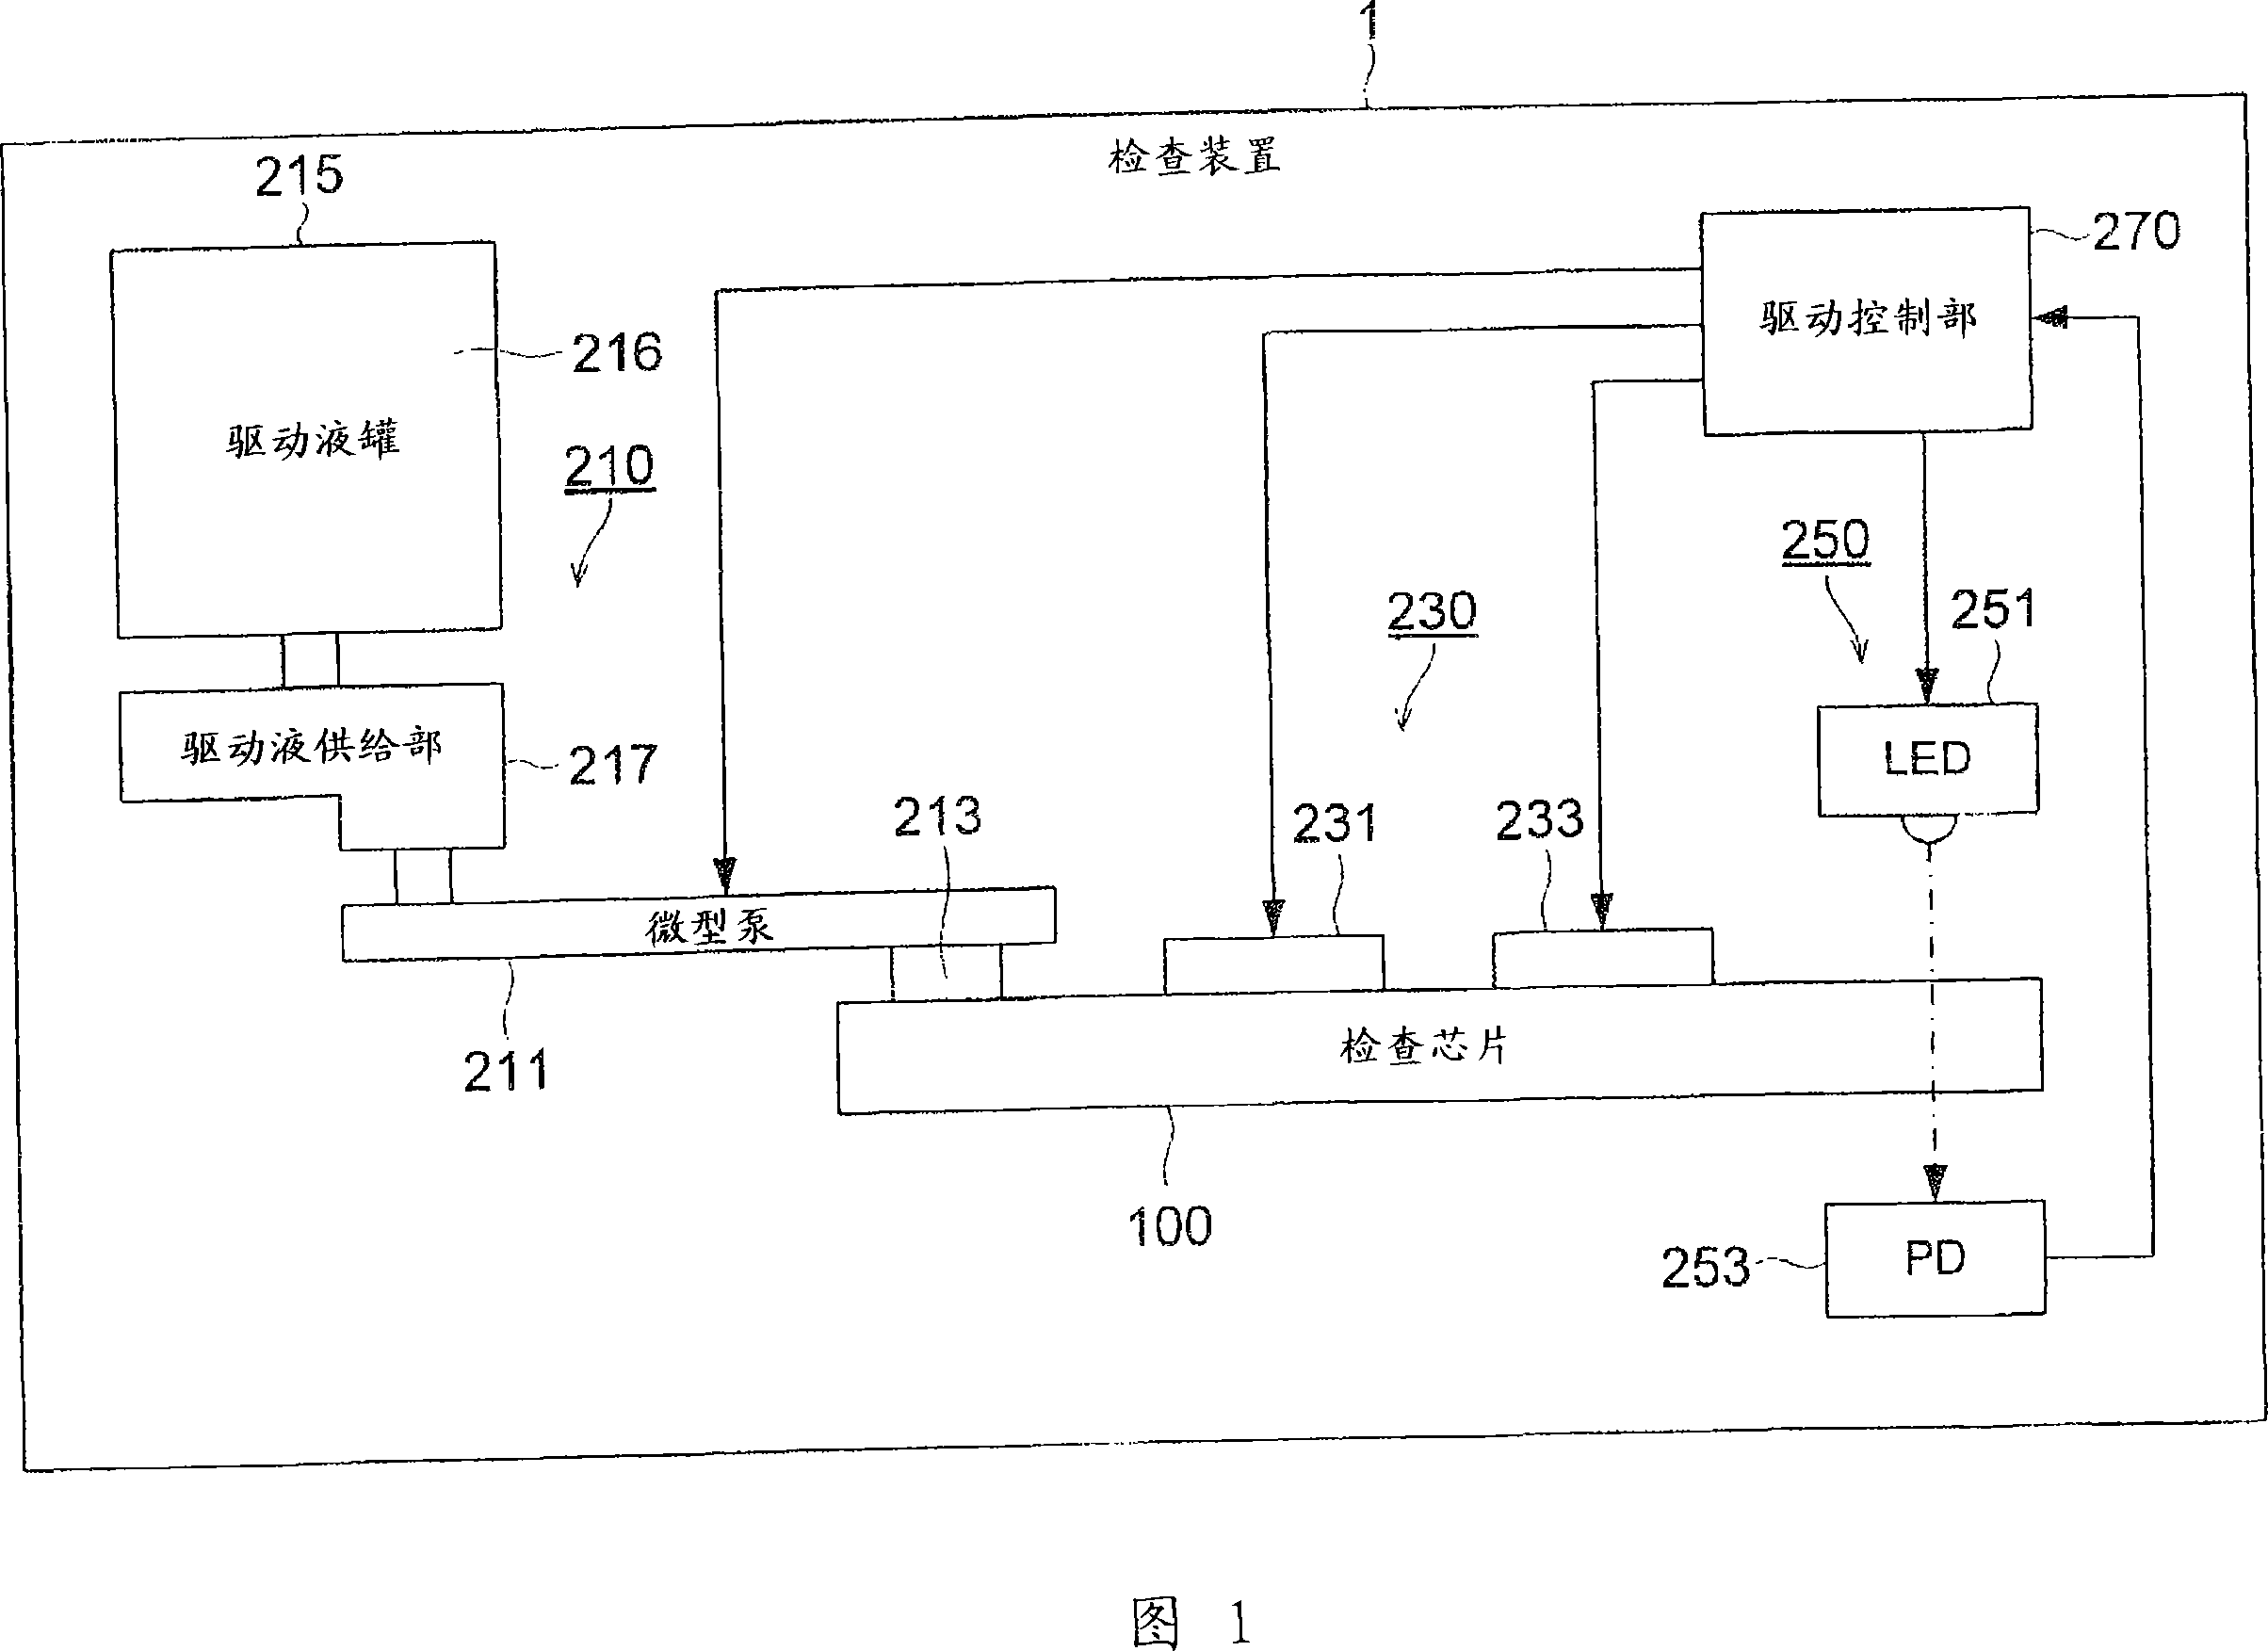 Micro total analysis chip and micro total analysis system